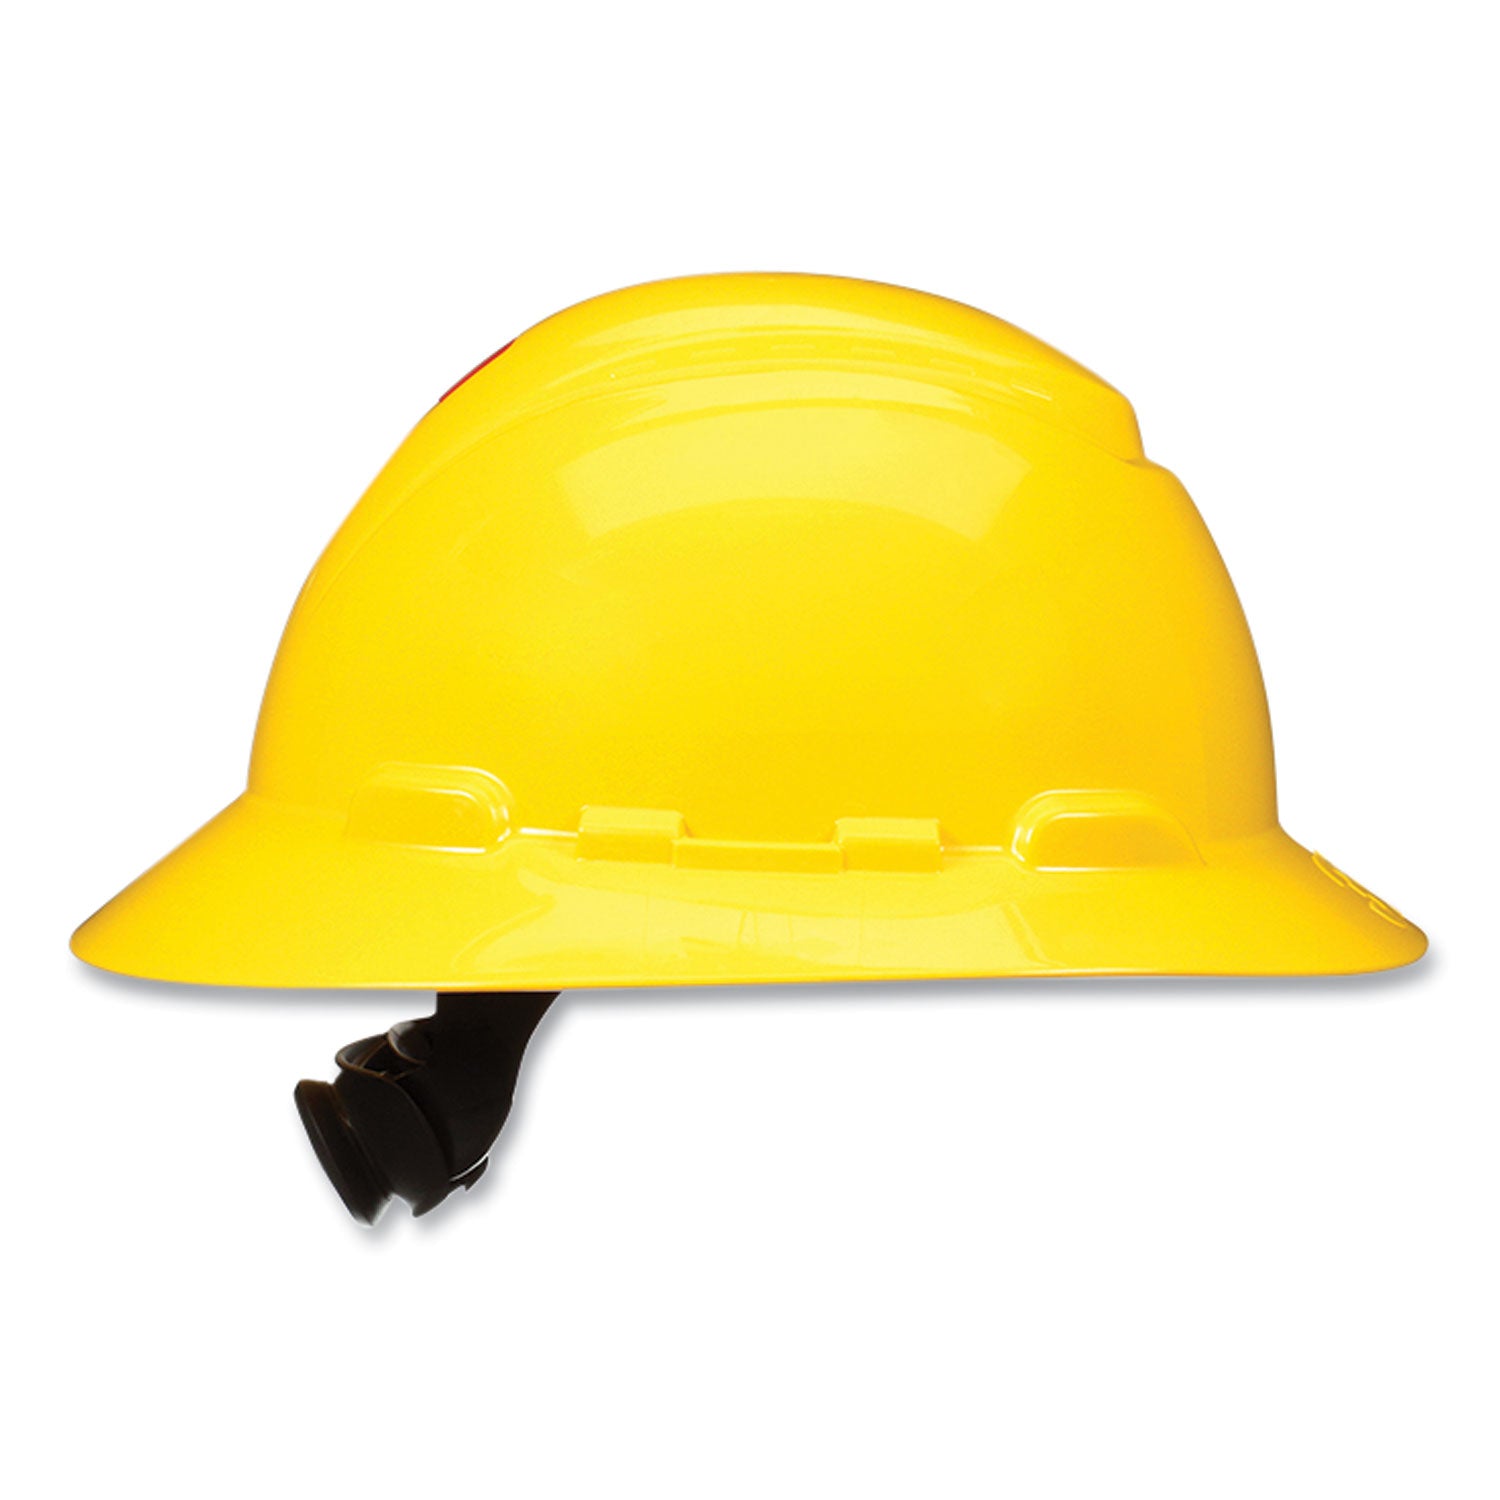 securefit-full-brim-hard-hat-with-uvicator-four-point-ratchet-suspension-yellow_mmmh802sfruv - 2